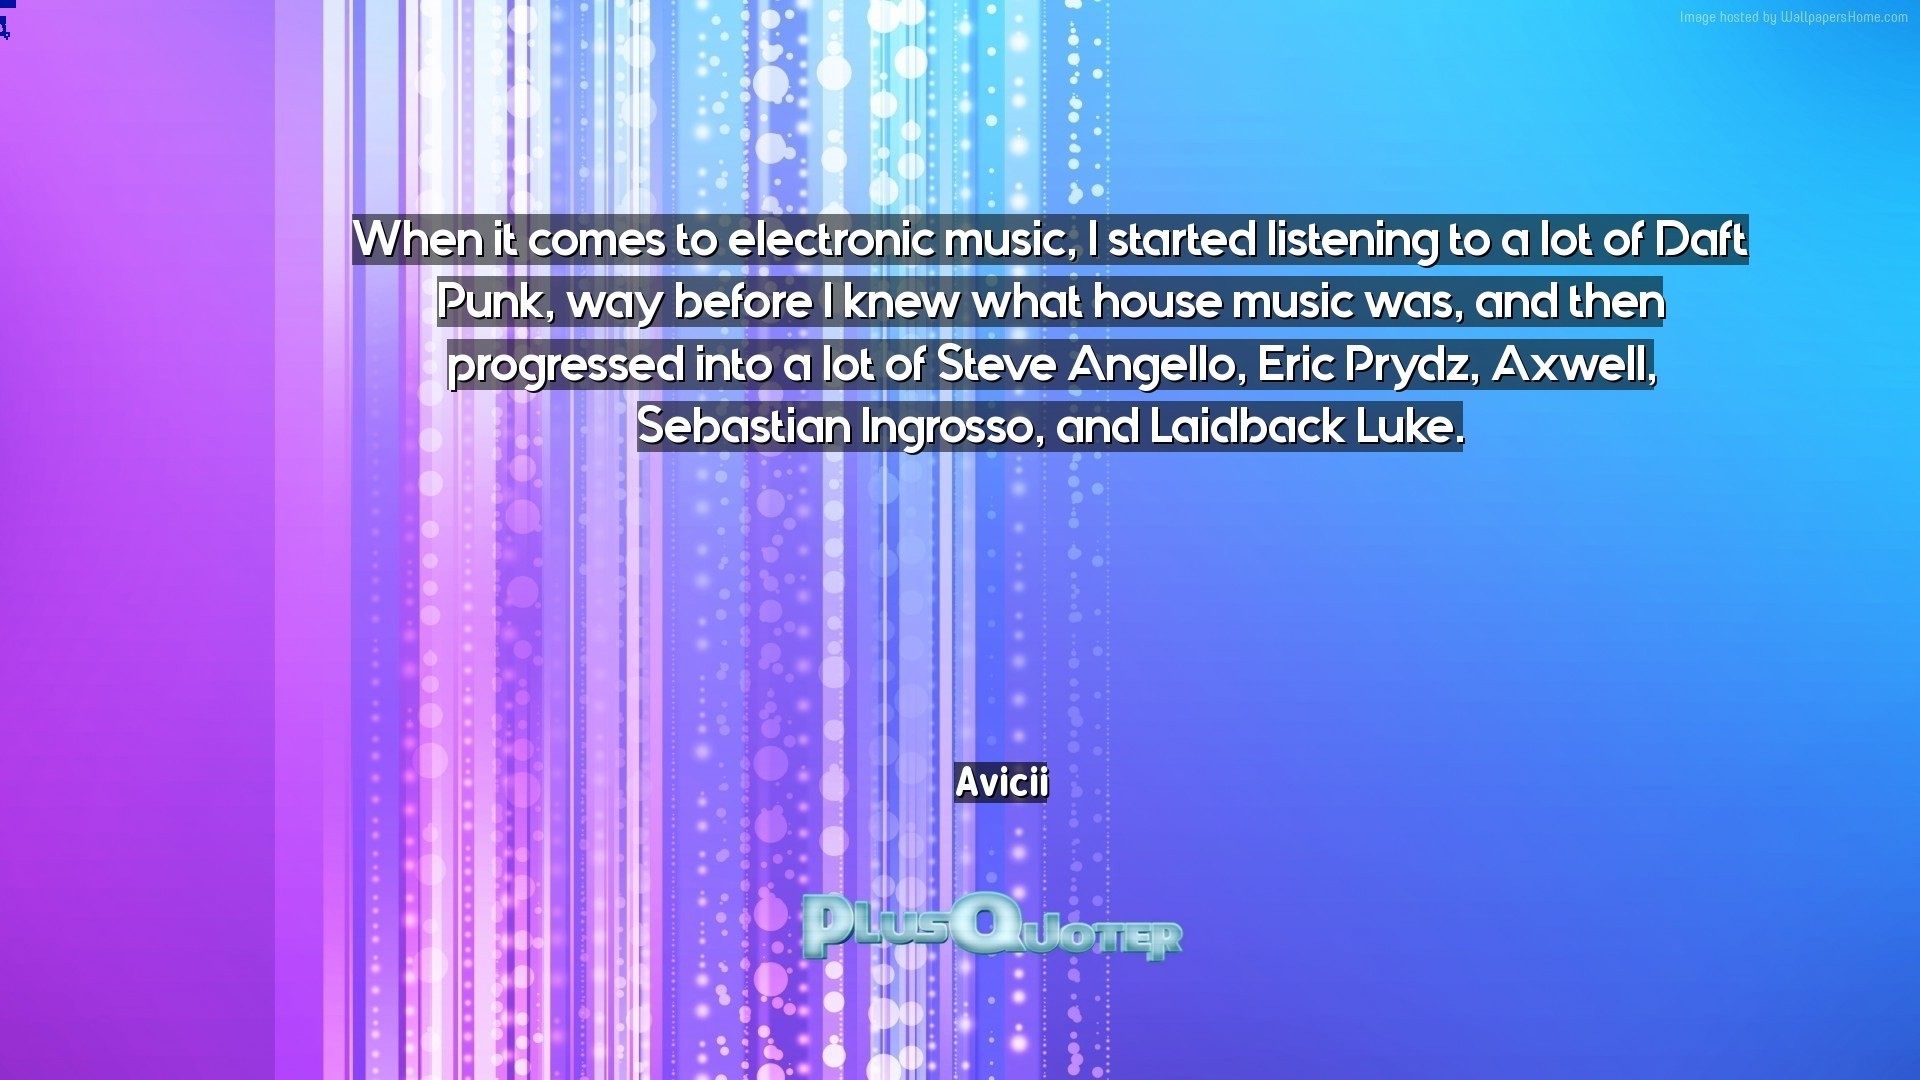 1920x1080 Download Wallpaper with inspirational Quotes- "When it comes to electronic  music, I started